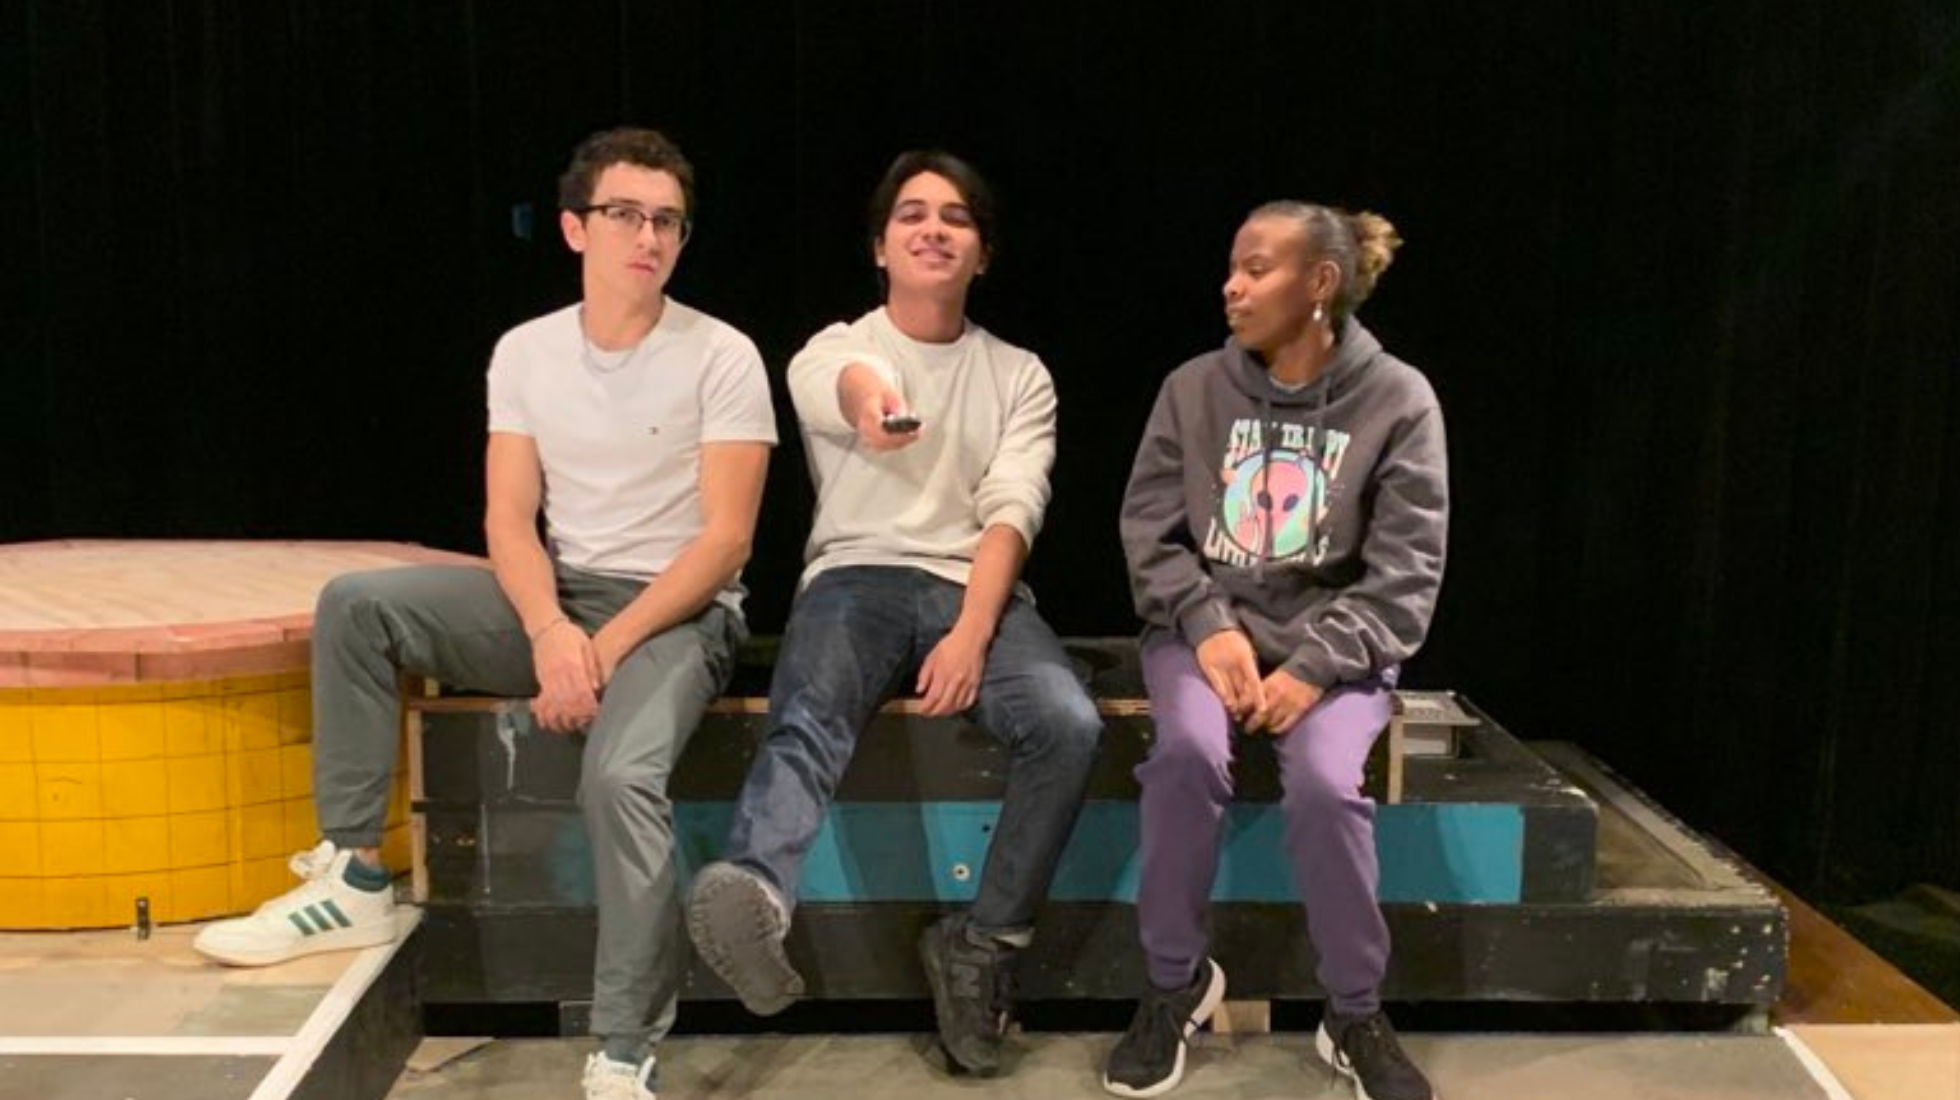 Jeremy Rho, left, Daniel Savala, center, and Lilac Kirkpatrick, right, rehearse a scene for Salvation Road debuting this week. Photo courtesy of Katie Rodda 